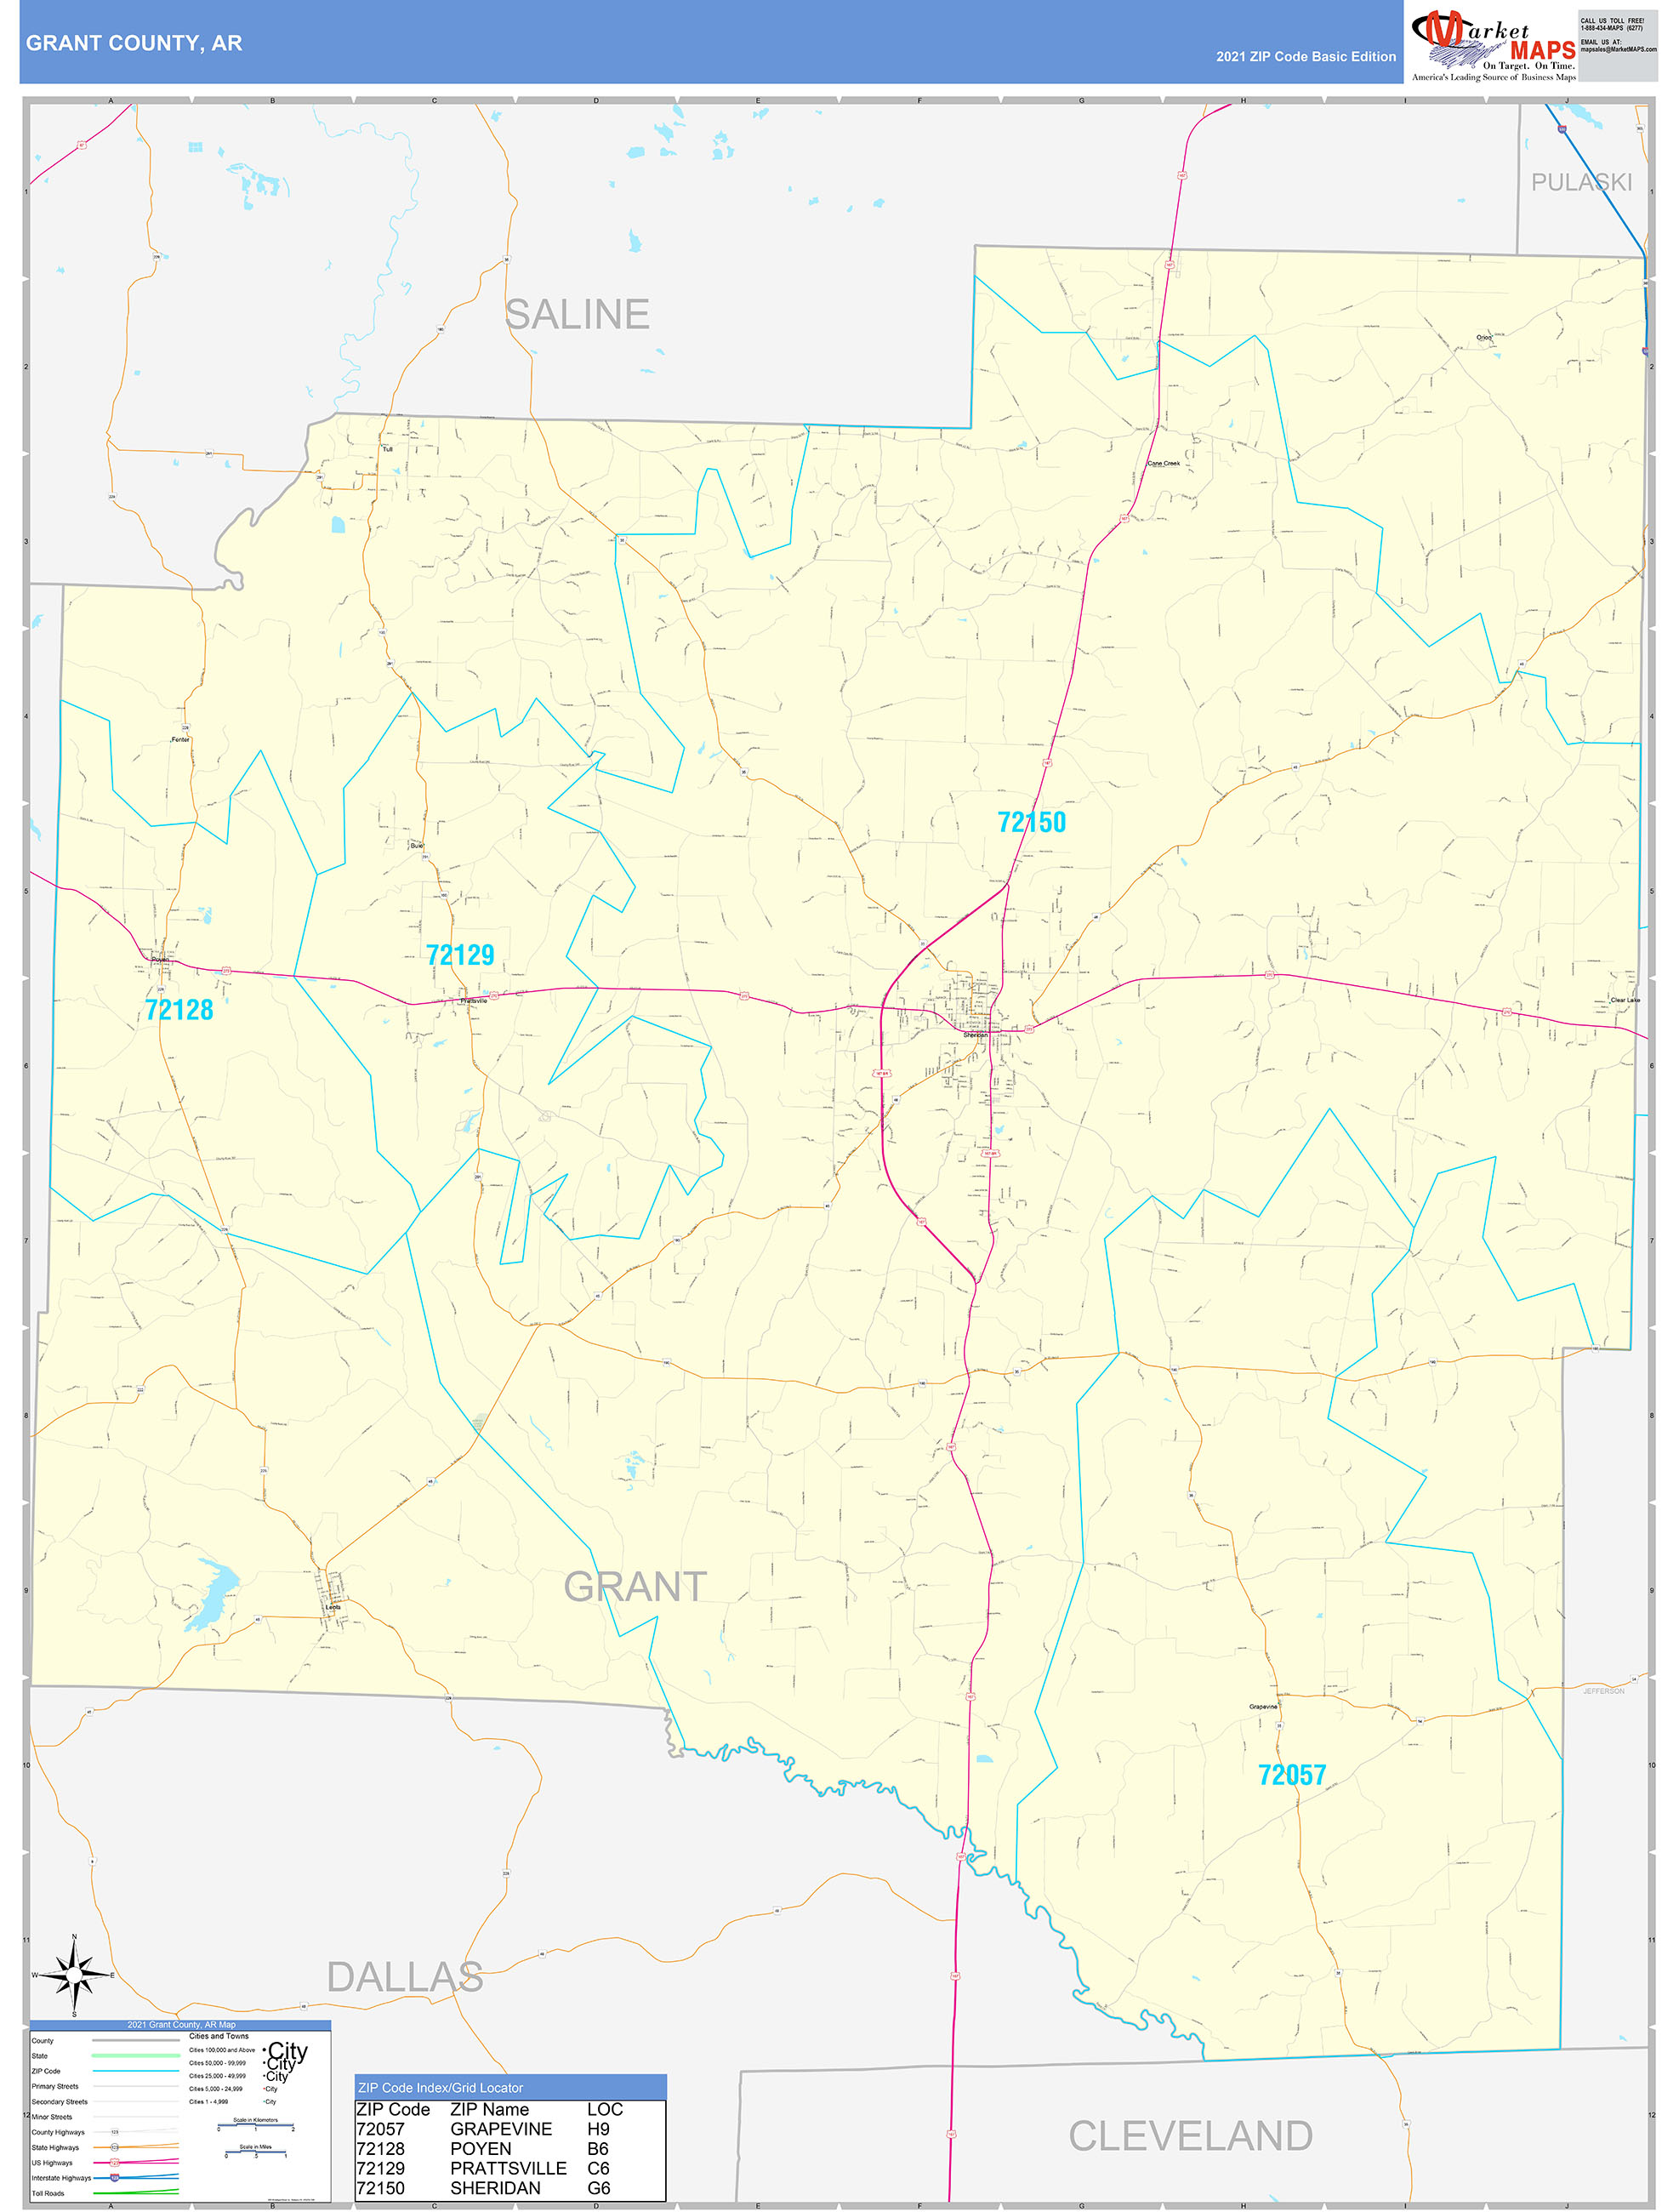 Grant County, AR Zip Code Wall Map Basic Style by MarketMAPS - MapSales